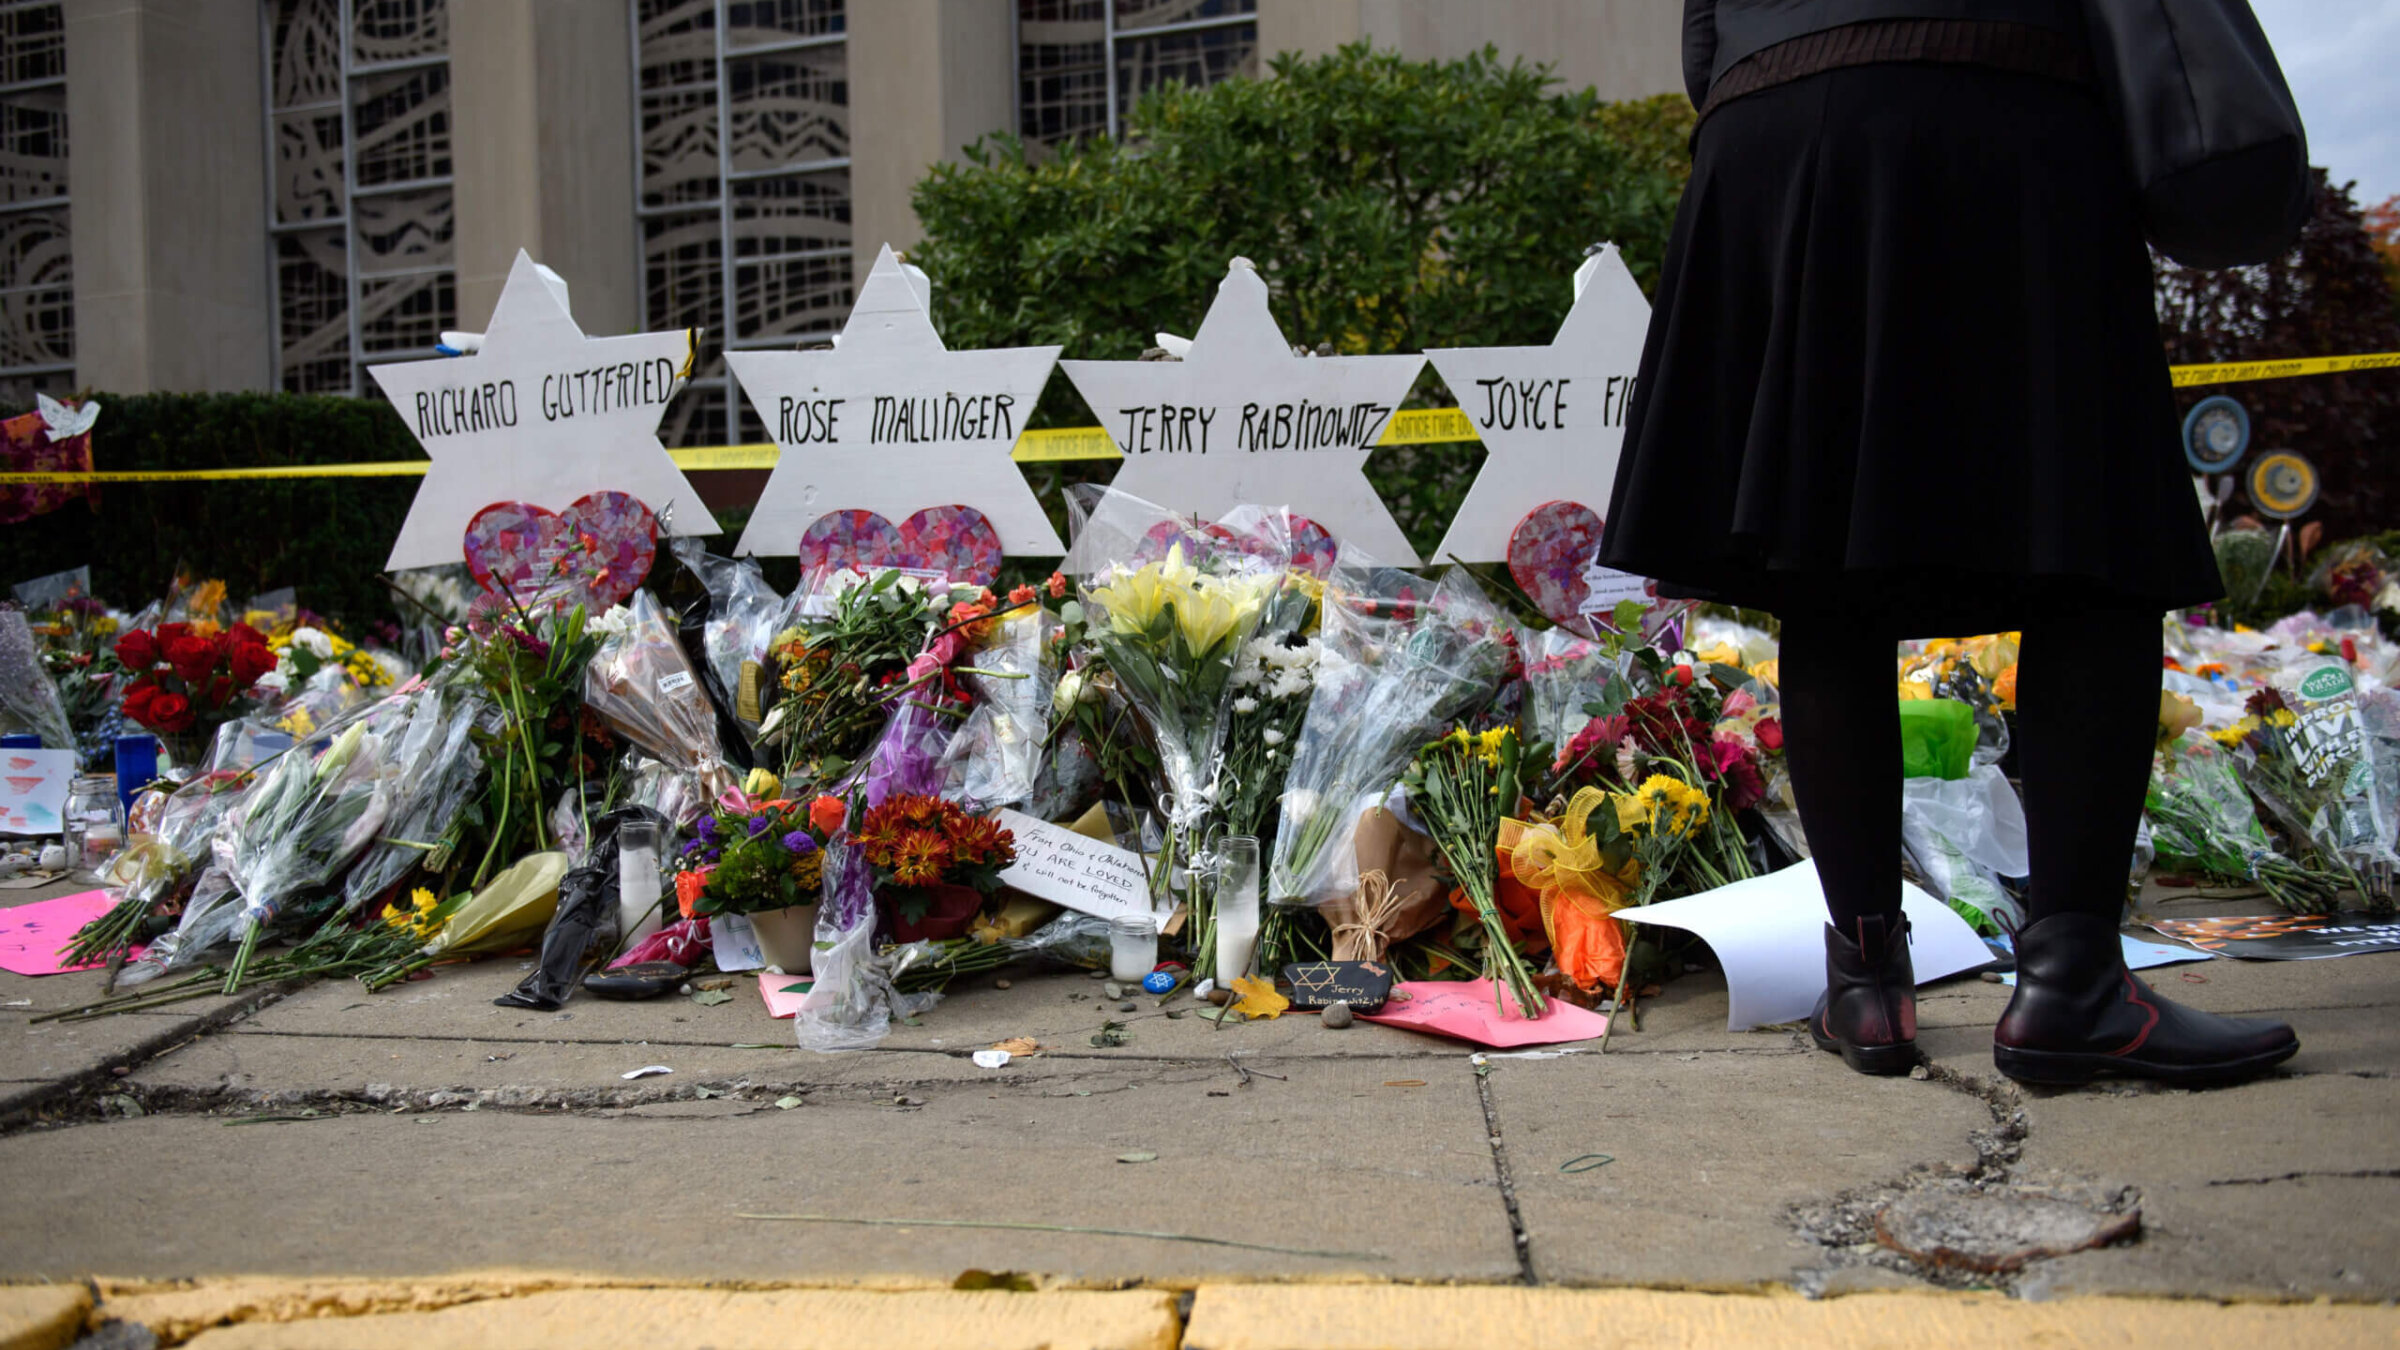 Mourners visit the memorial outside the Tree of Life Synagogue on October 31, 2018 in Pittsburgh, Pennsylvania, where eleven Jews were killed in a mass shooting.